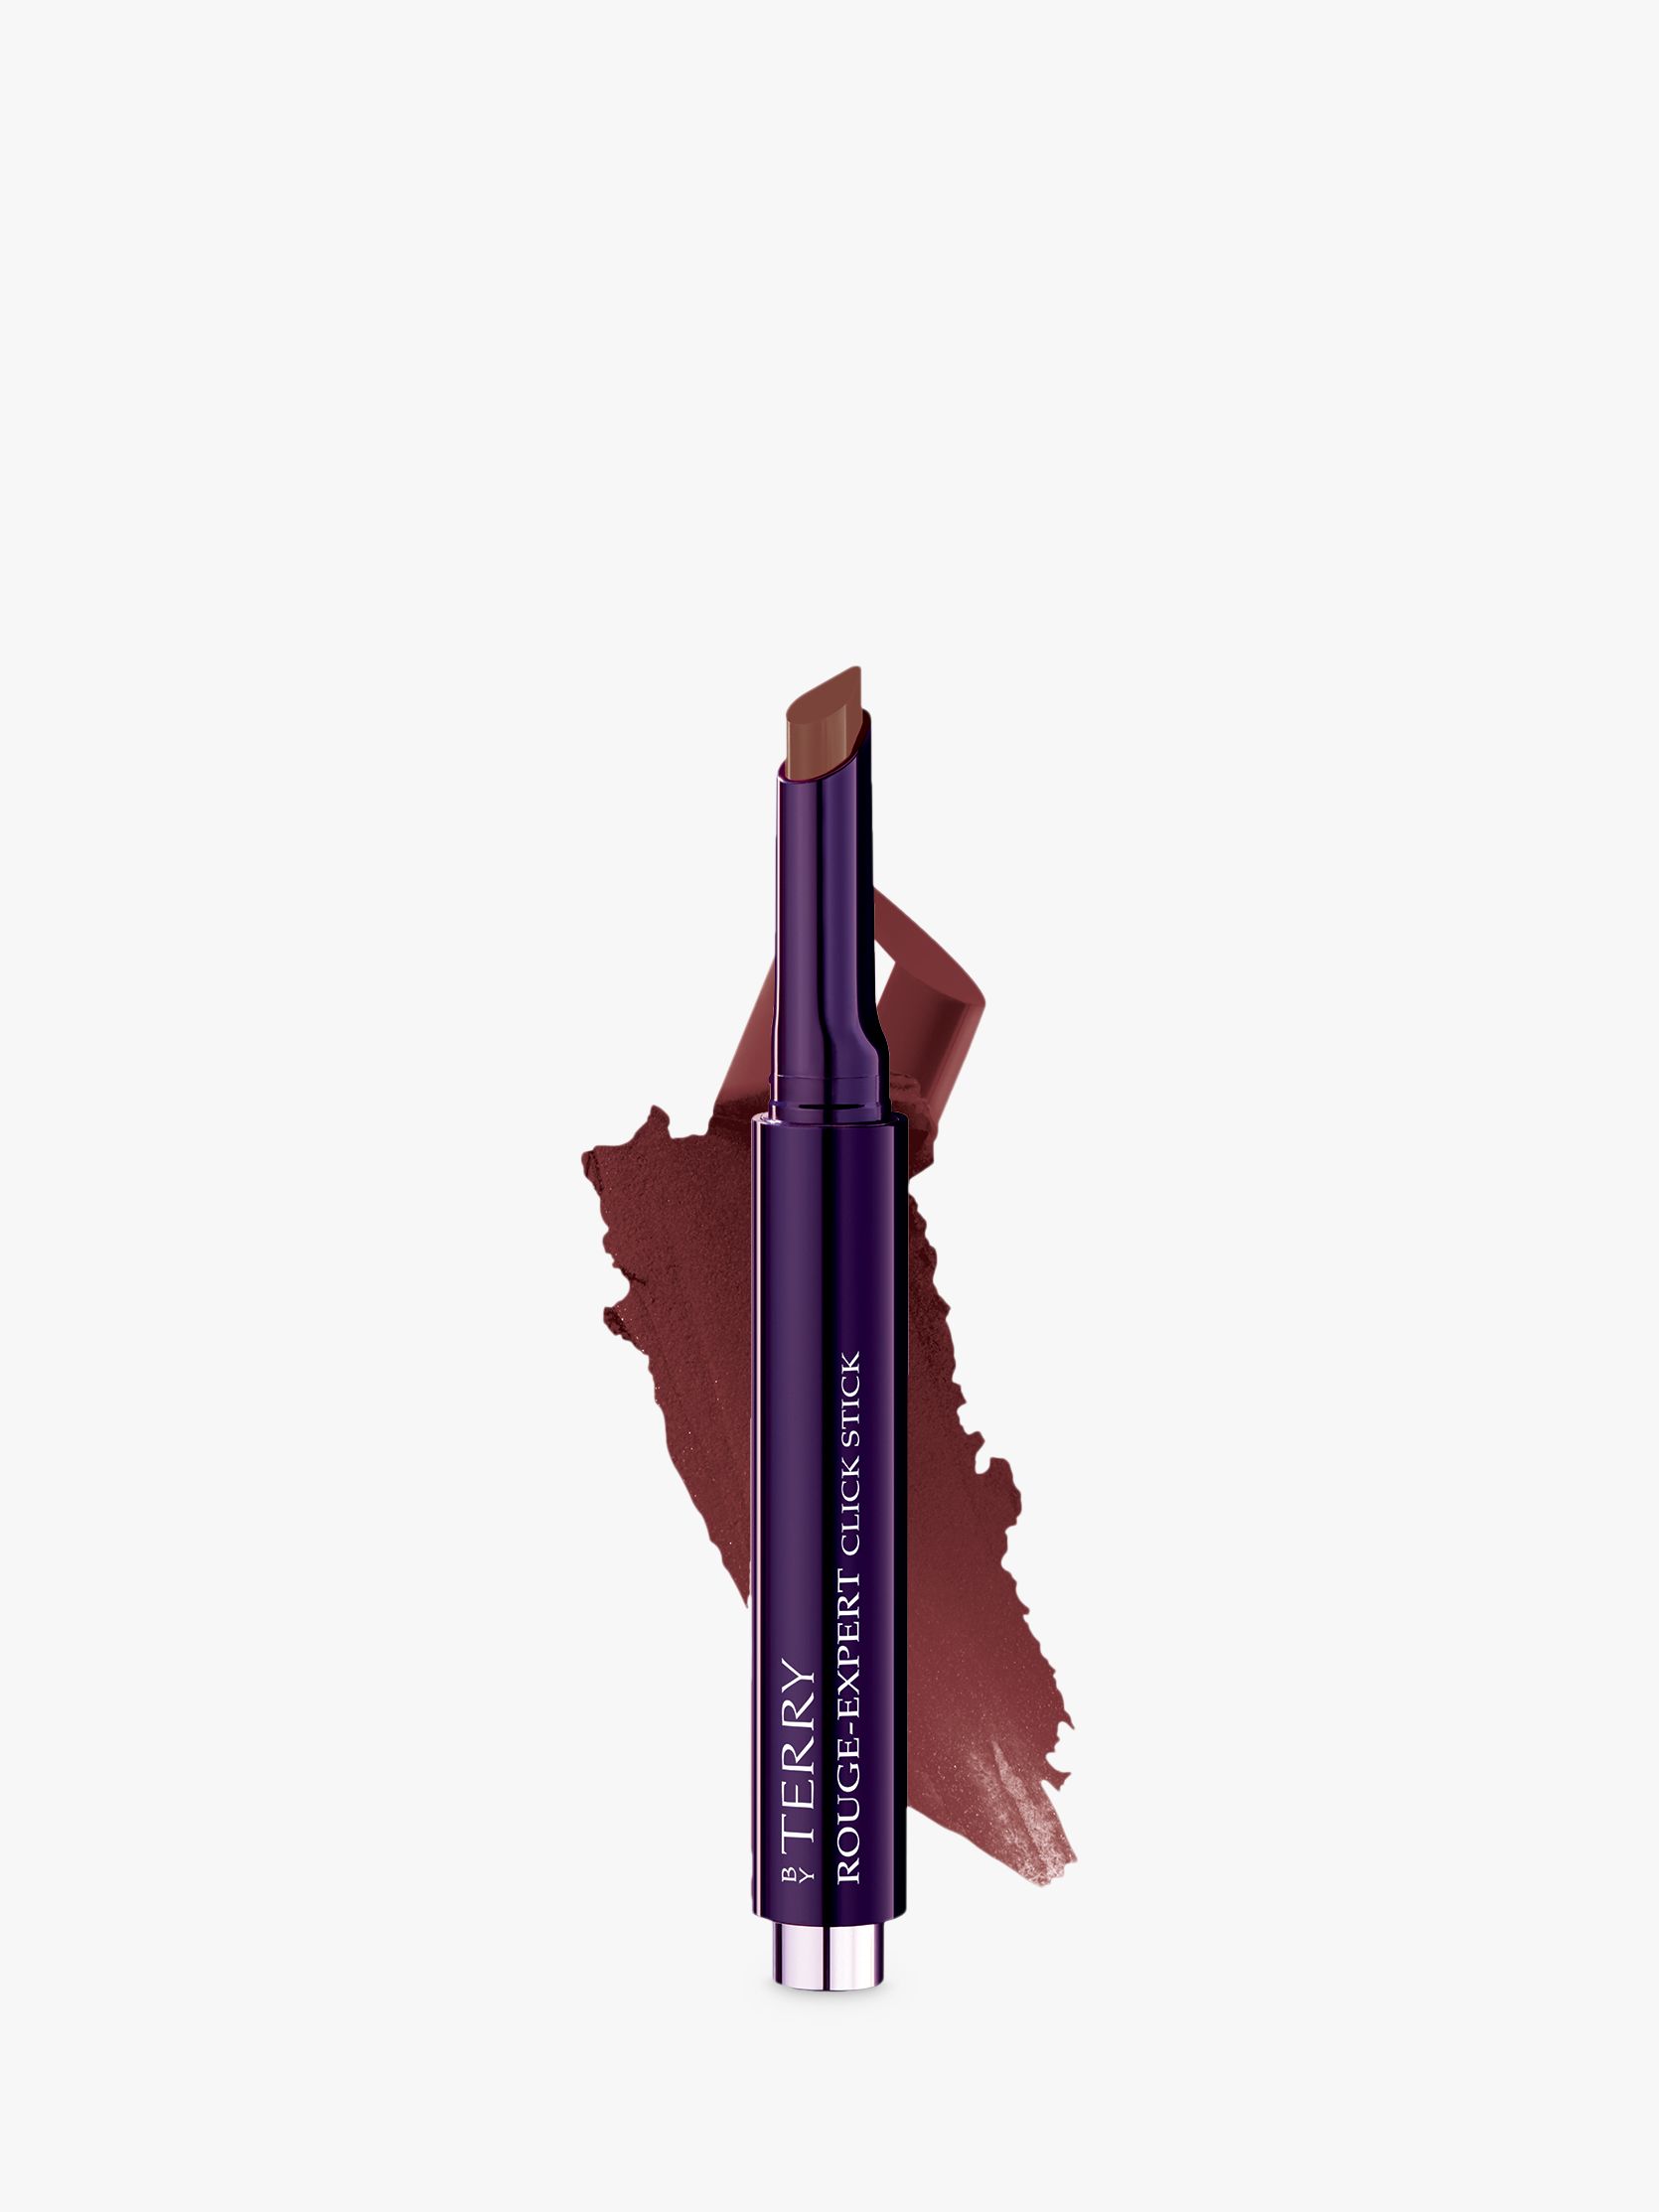 BY TERRY Rouge Expert Click Stick Lipstick, Chocolate Tea